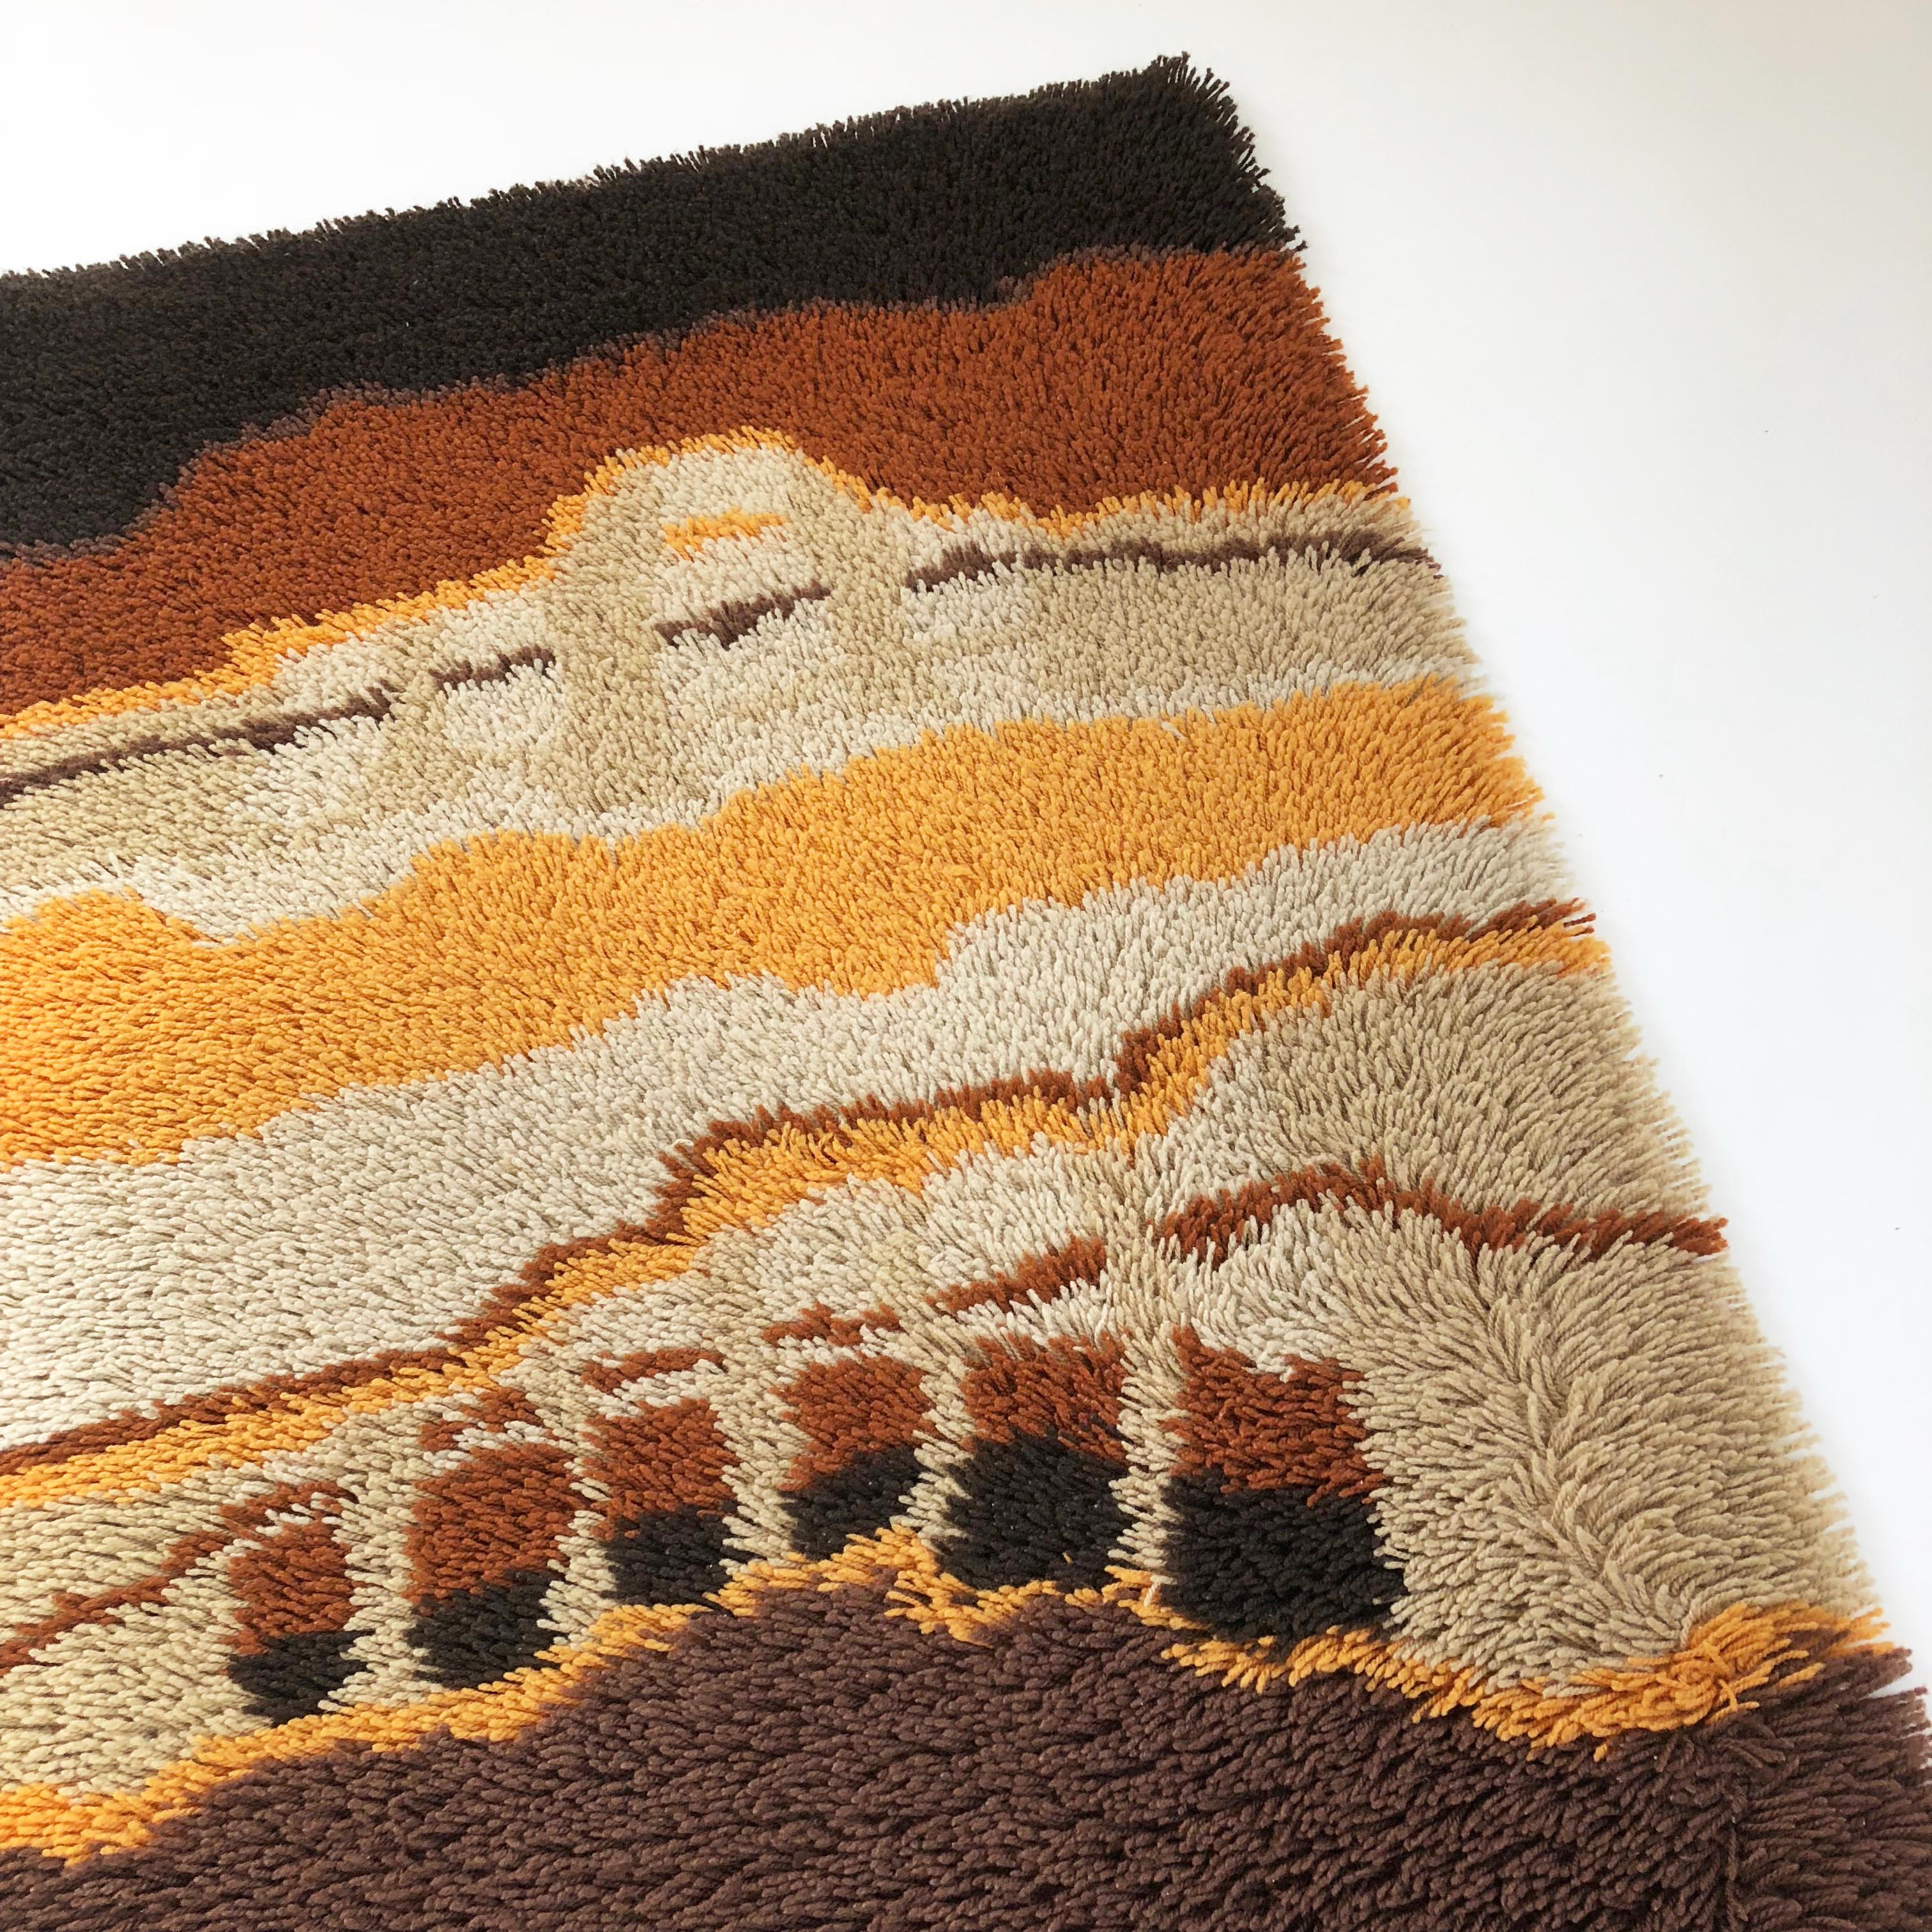 20th Century Small 1970s Modernist Multi-Color High Pile Rya Rug by Desso, Netherlands No. 2